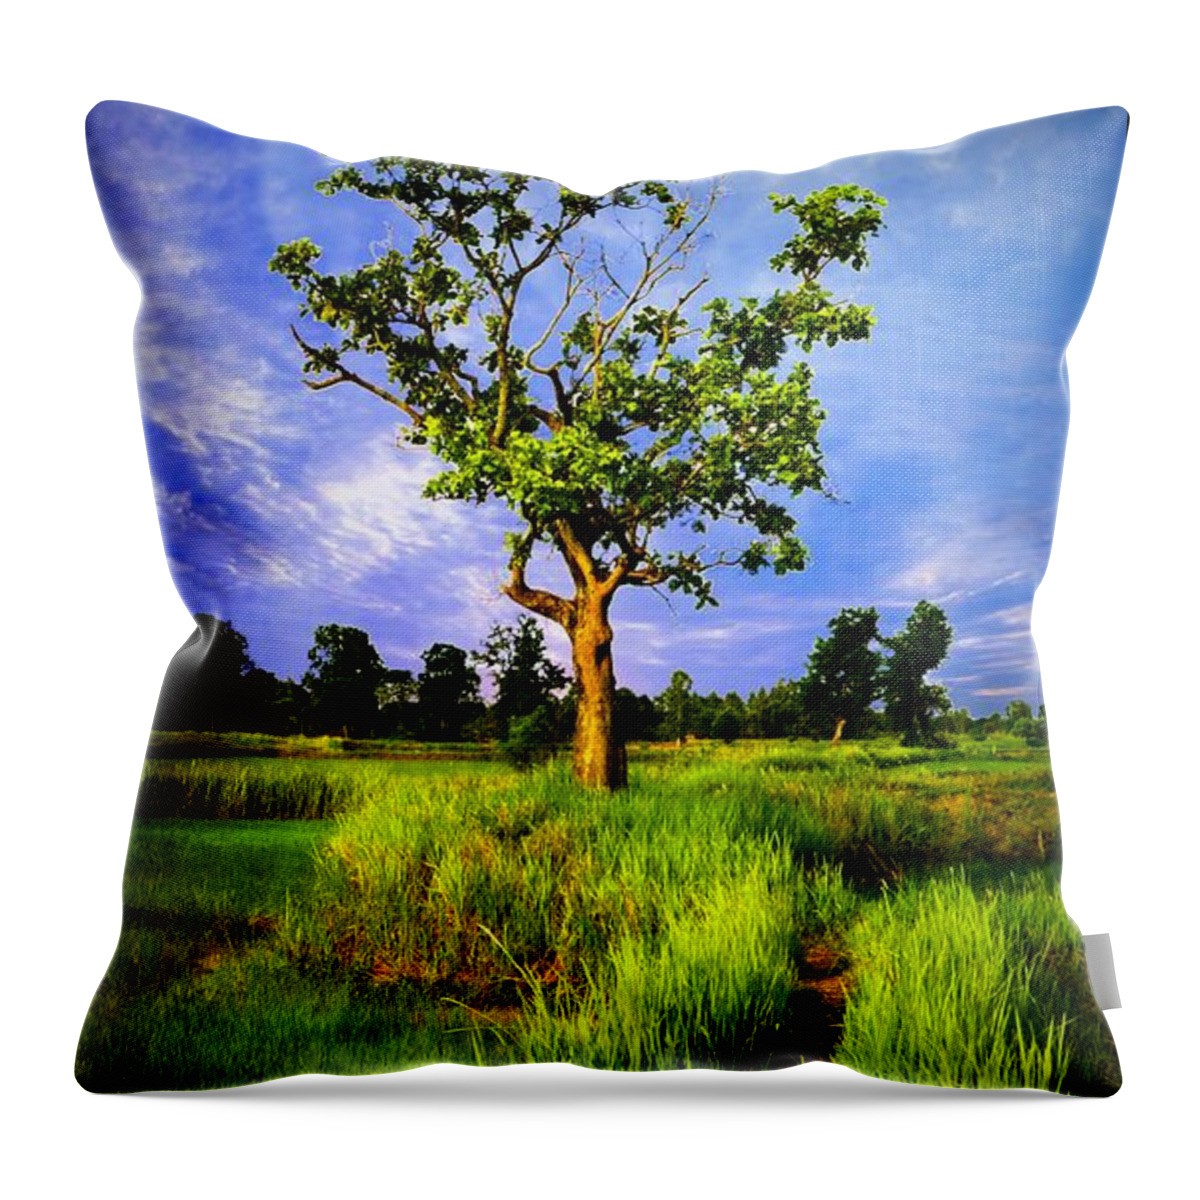 Landscape Throw Pillow featuring the photograph Walkway Trough The Paddy Field by Ian Gledhill